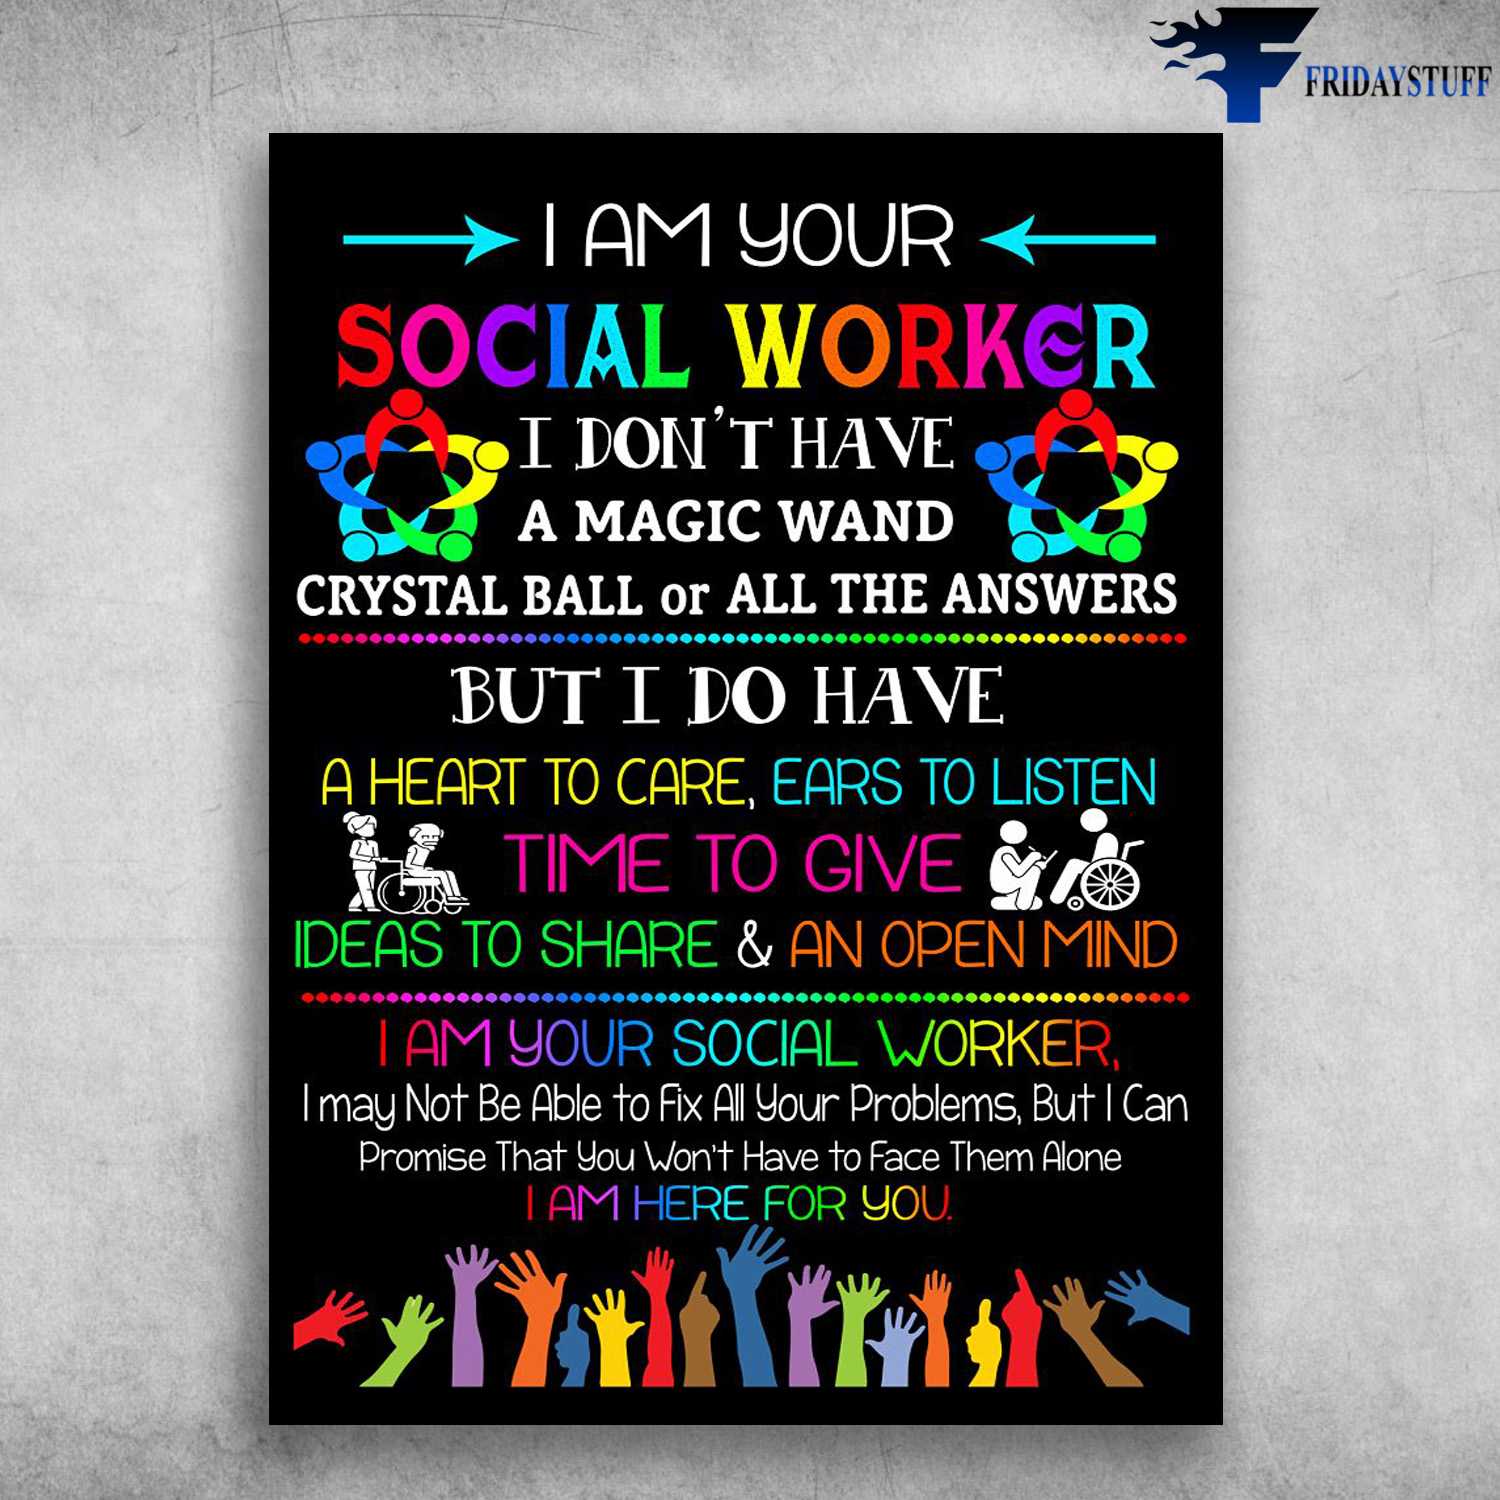 Social Worker, I Am Your Social Worker, I Don't Have A Magic Wand, Crystal Ball Or All The Answers, But I Do Have A Heart To Care, Ears To Listen